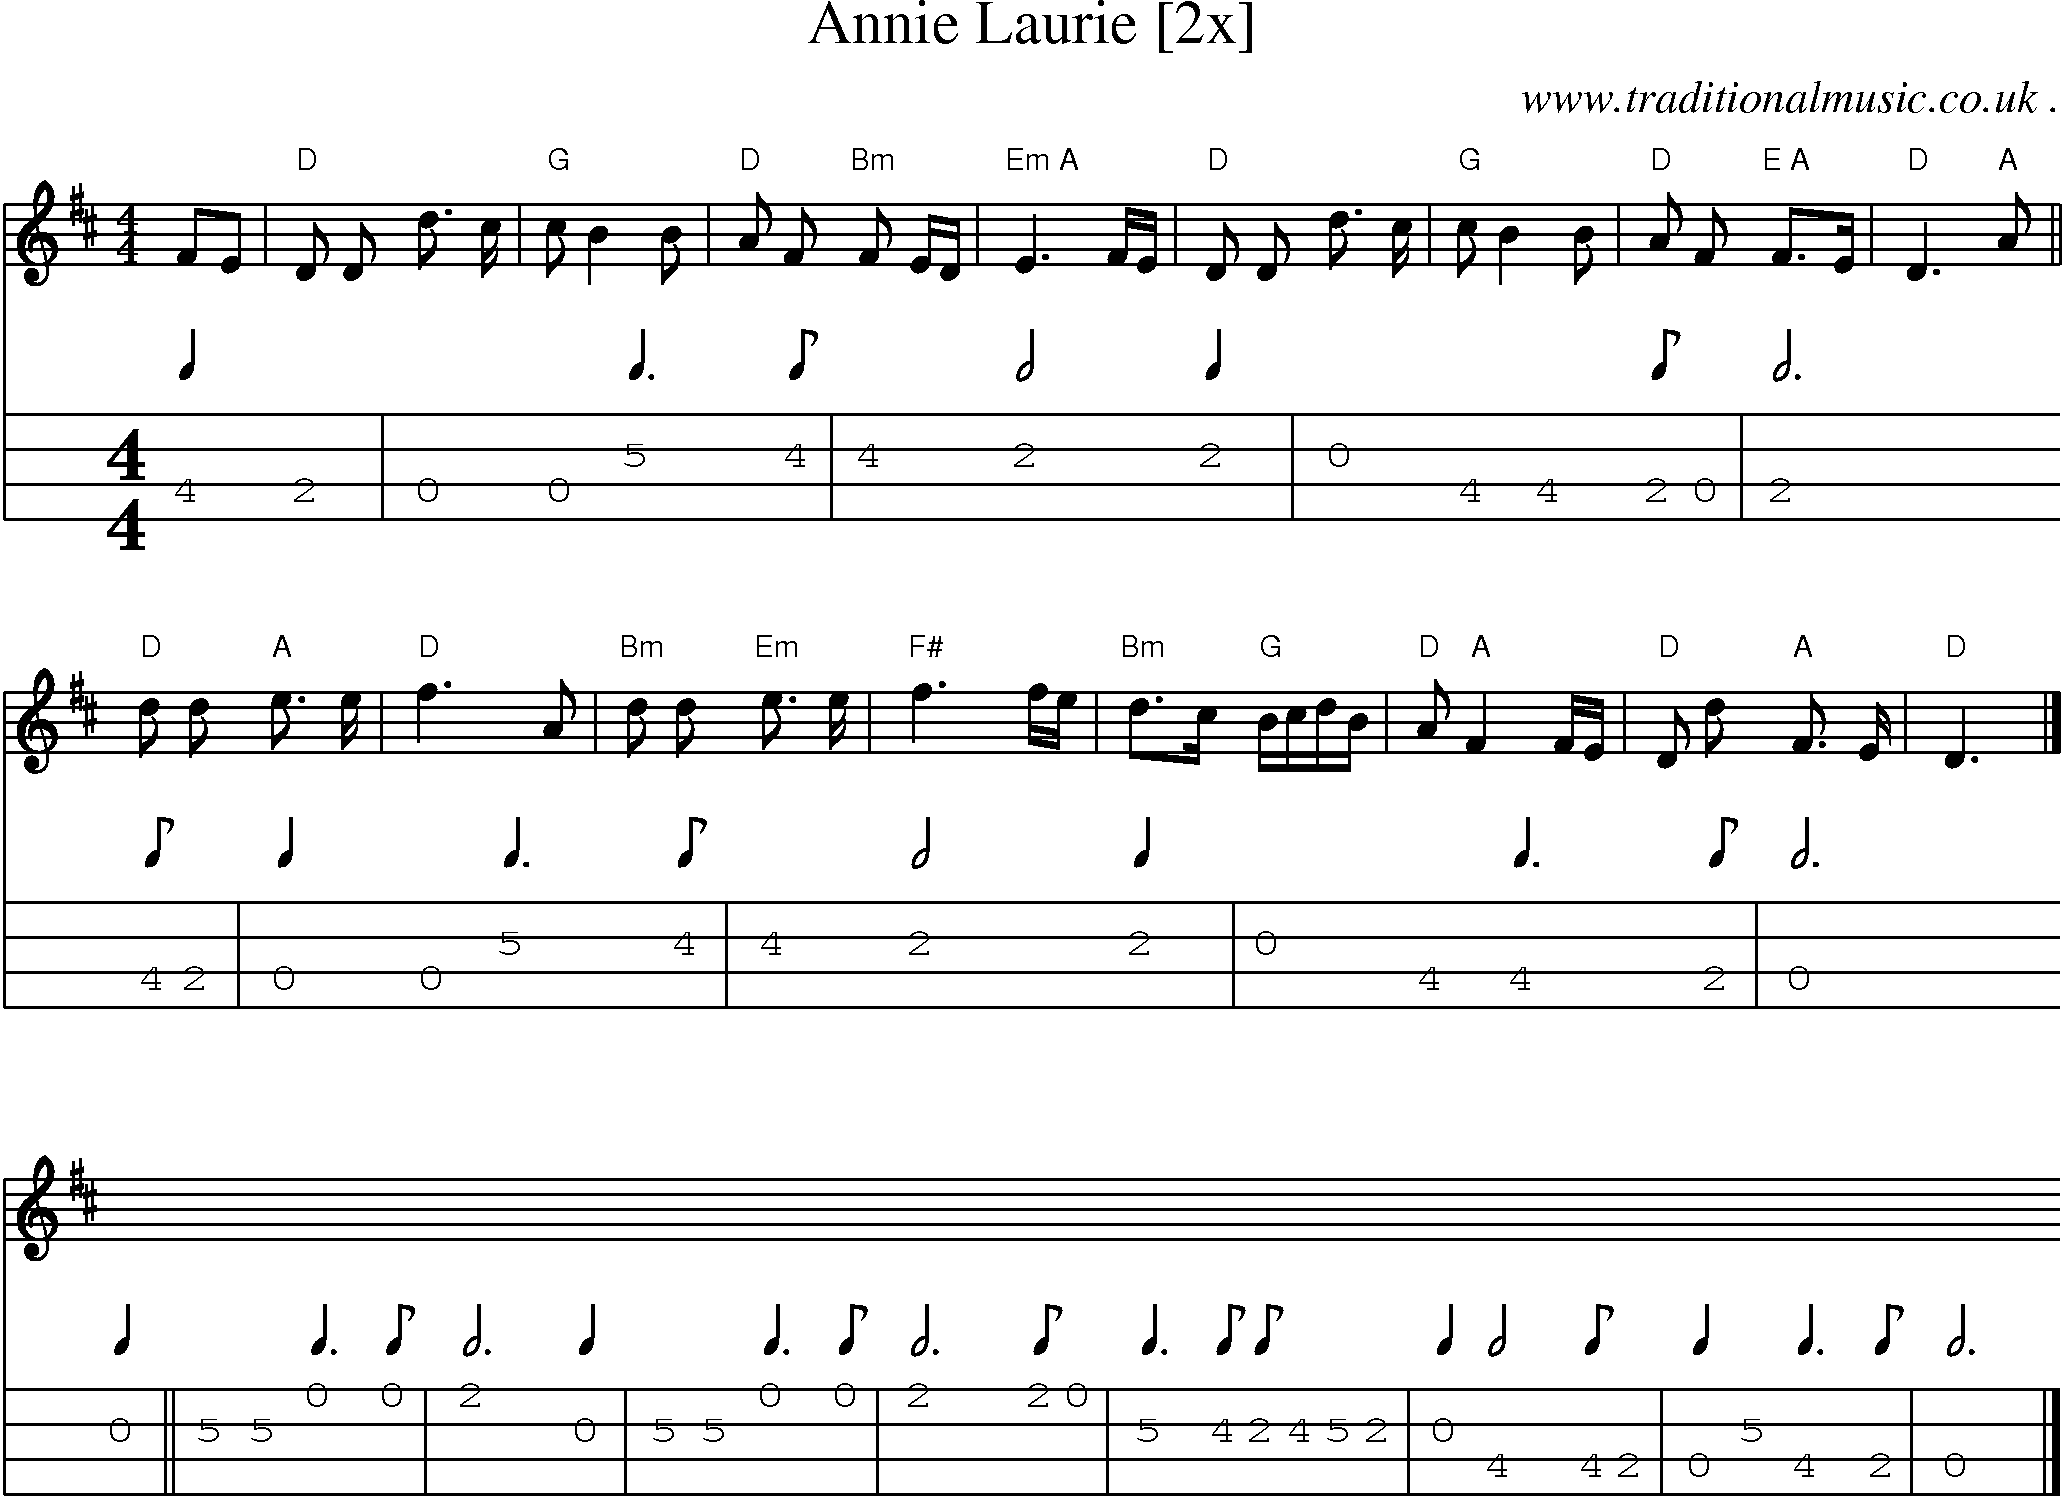 Sheet-music  score, Chords and Mandolin Tabs for Annie Laurie [2x]